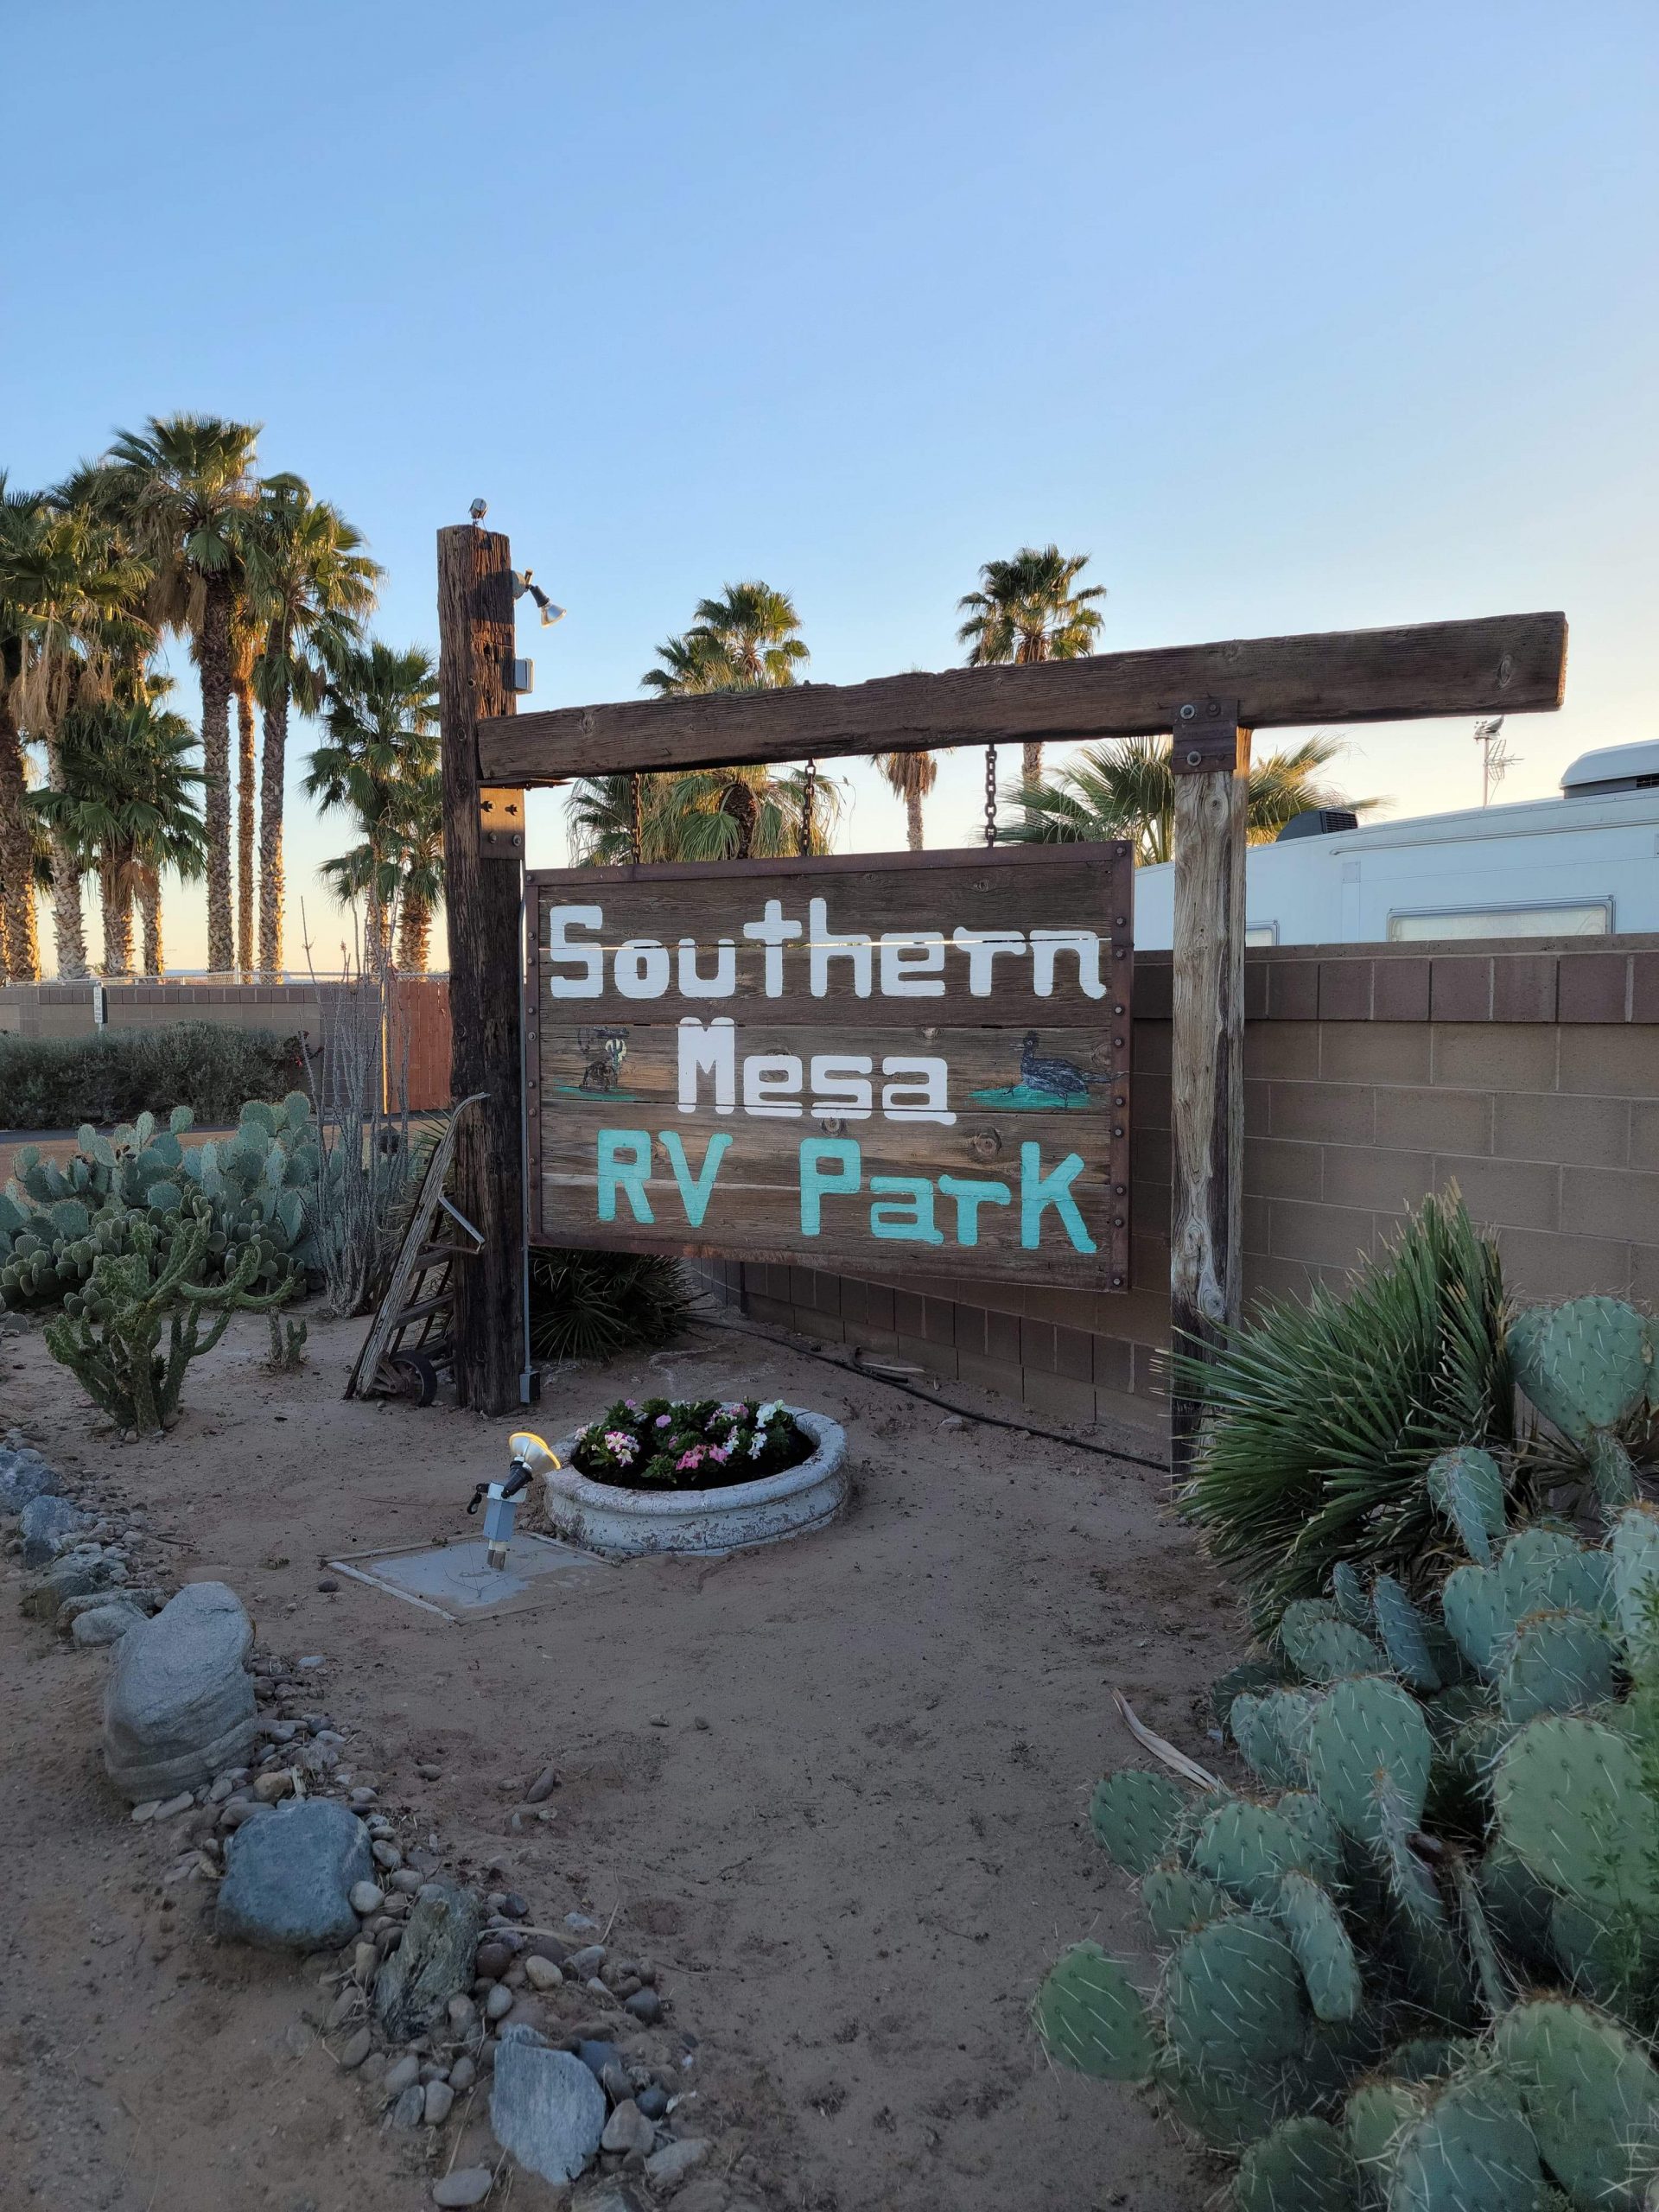 A swinging sign of Southern Mesa RV Park with a rustic look and various greens around with palm trees in the back along with a blue sky.